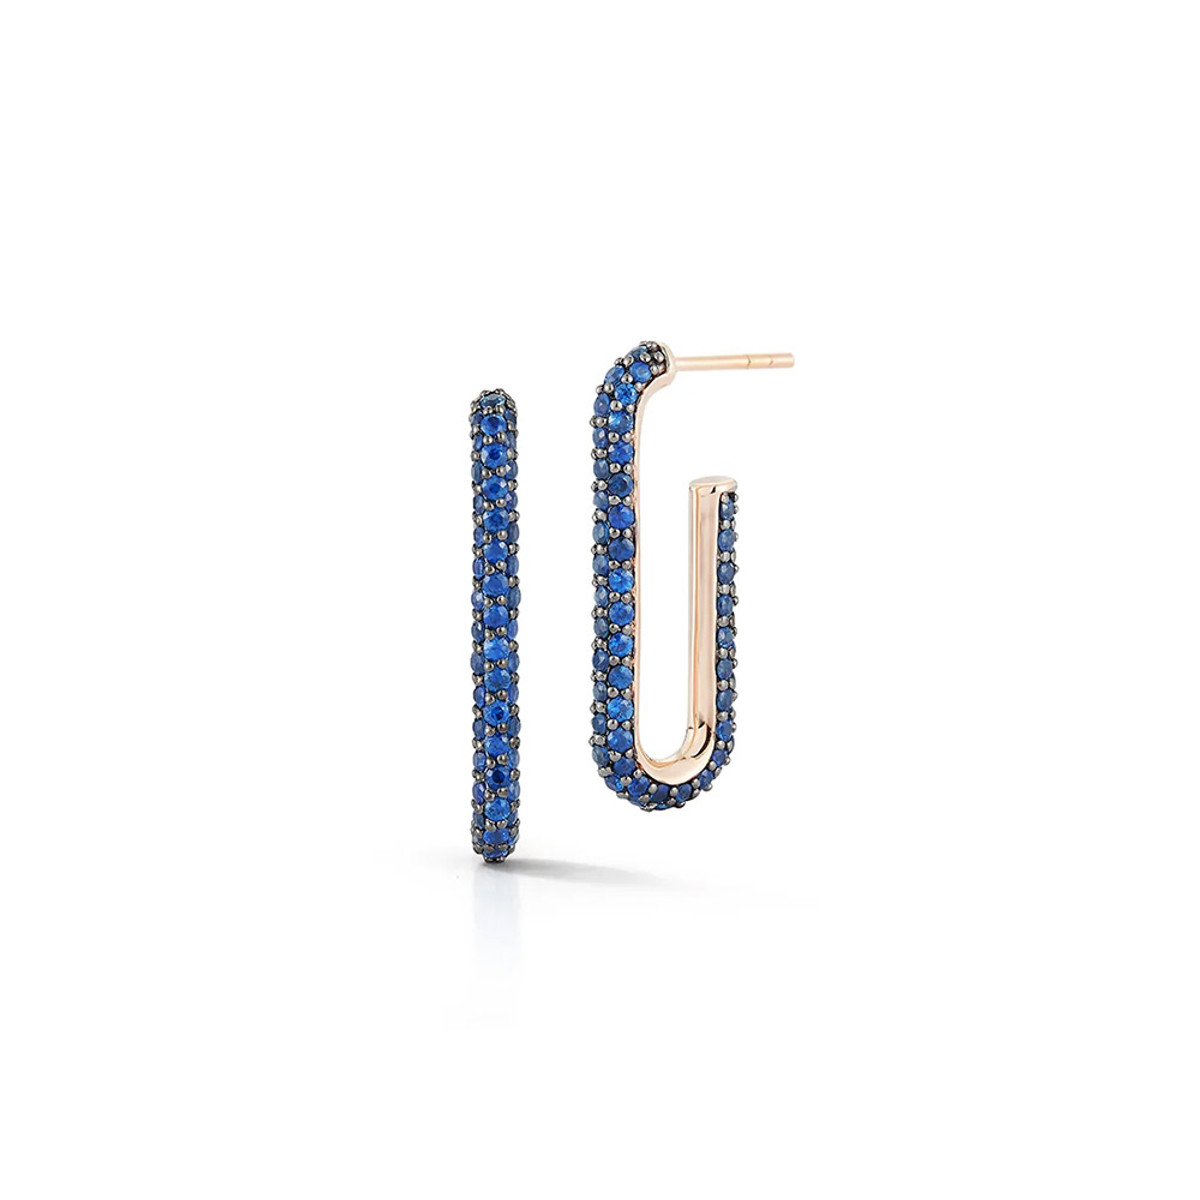 Walters Faith Saxon 18K Rose Gold and Blue Sapphire Elongated Chain Link Earrings Product Image